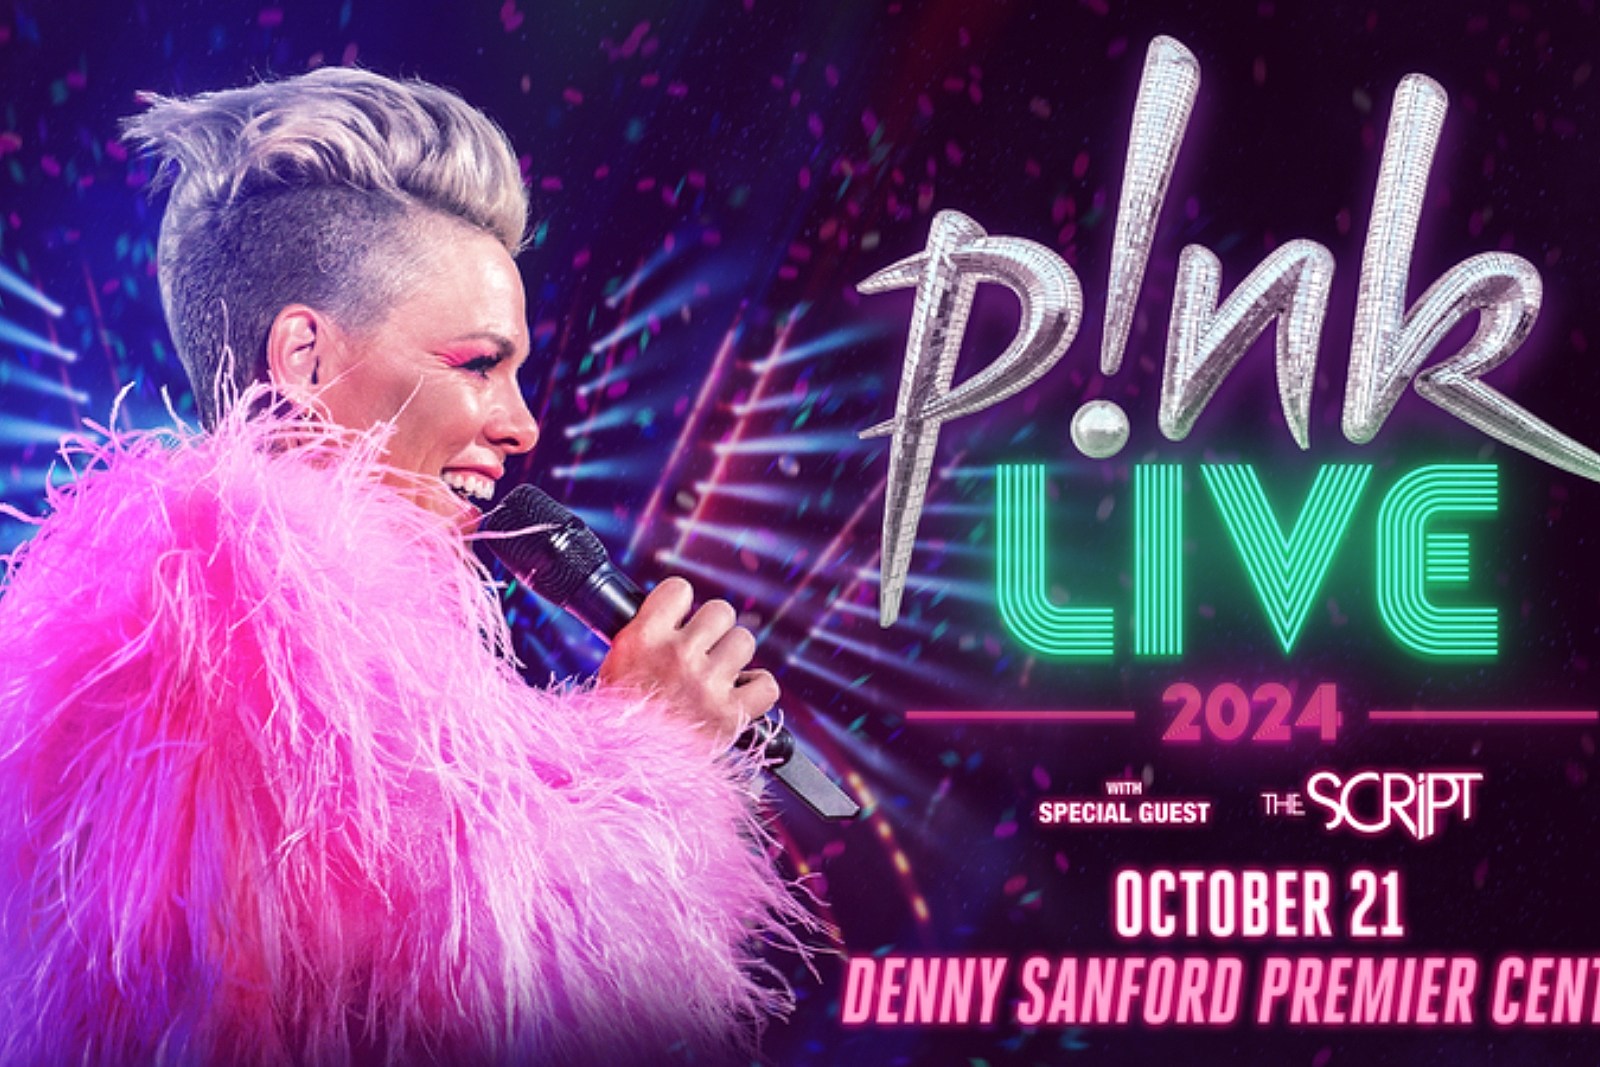 P!NK is coming to the Denny Sanford PREMIER